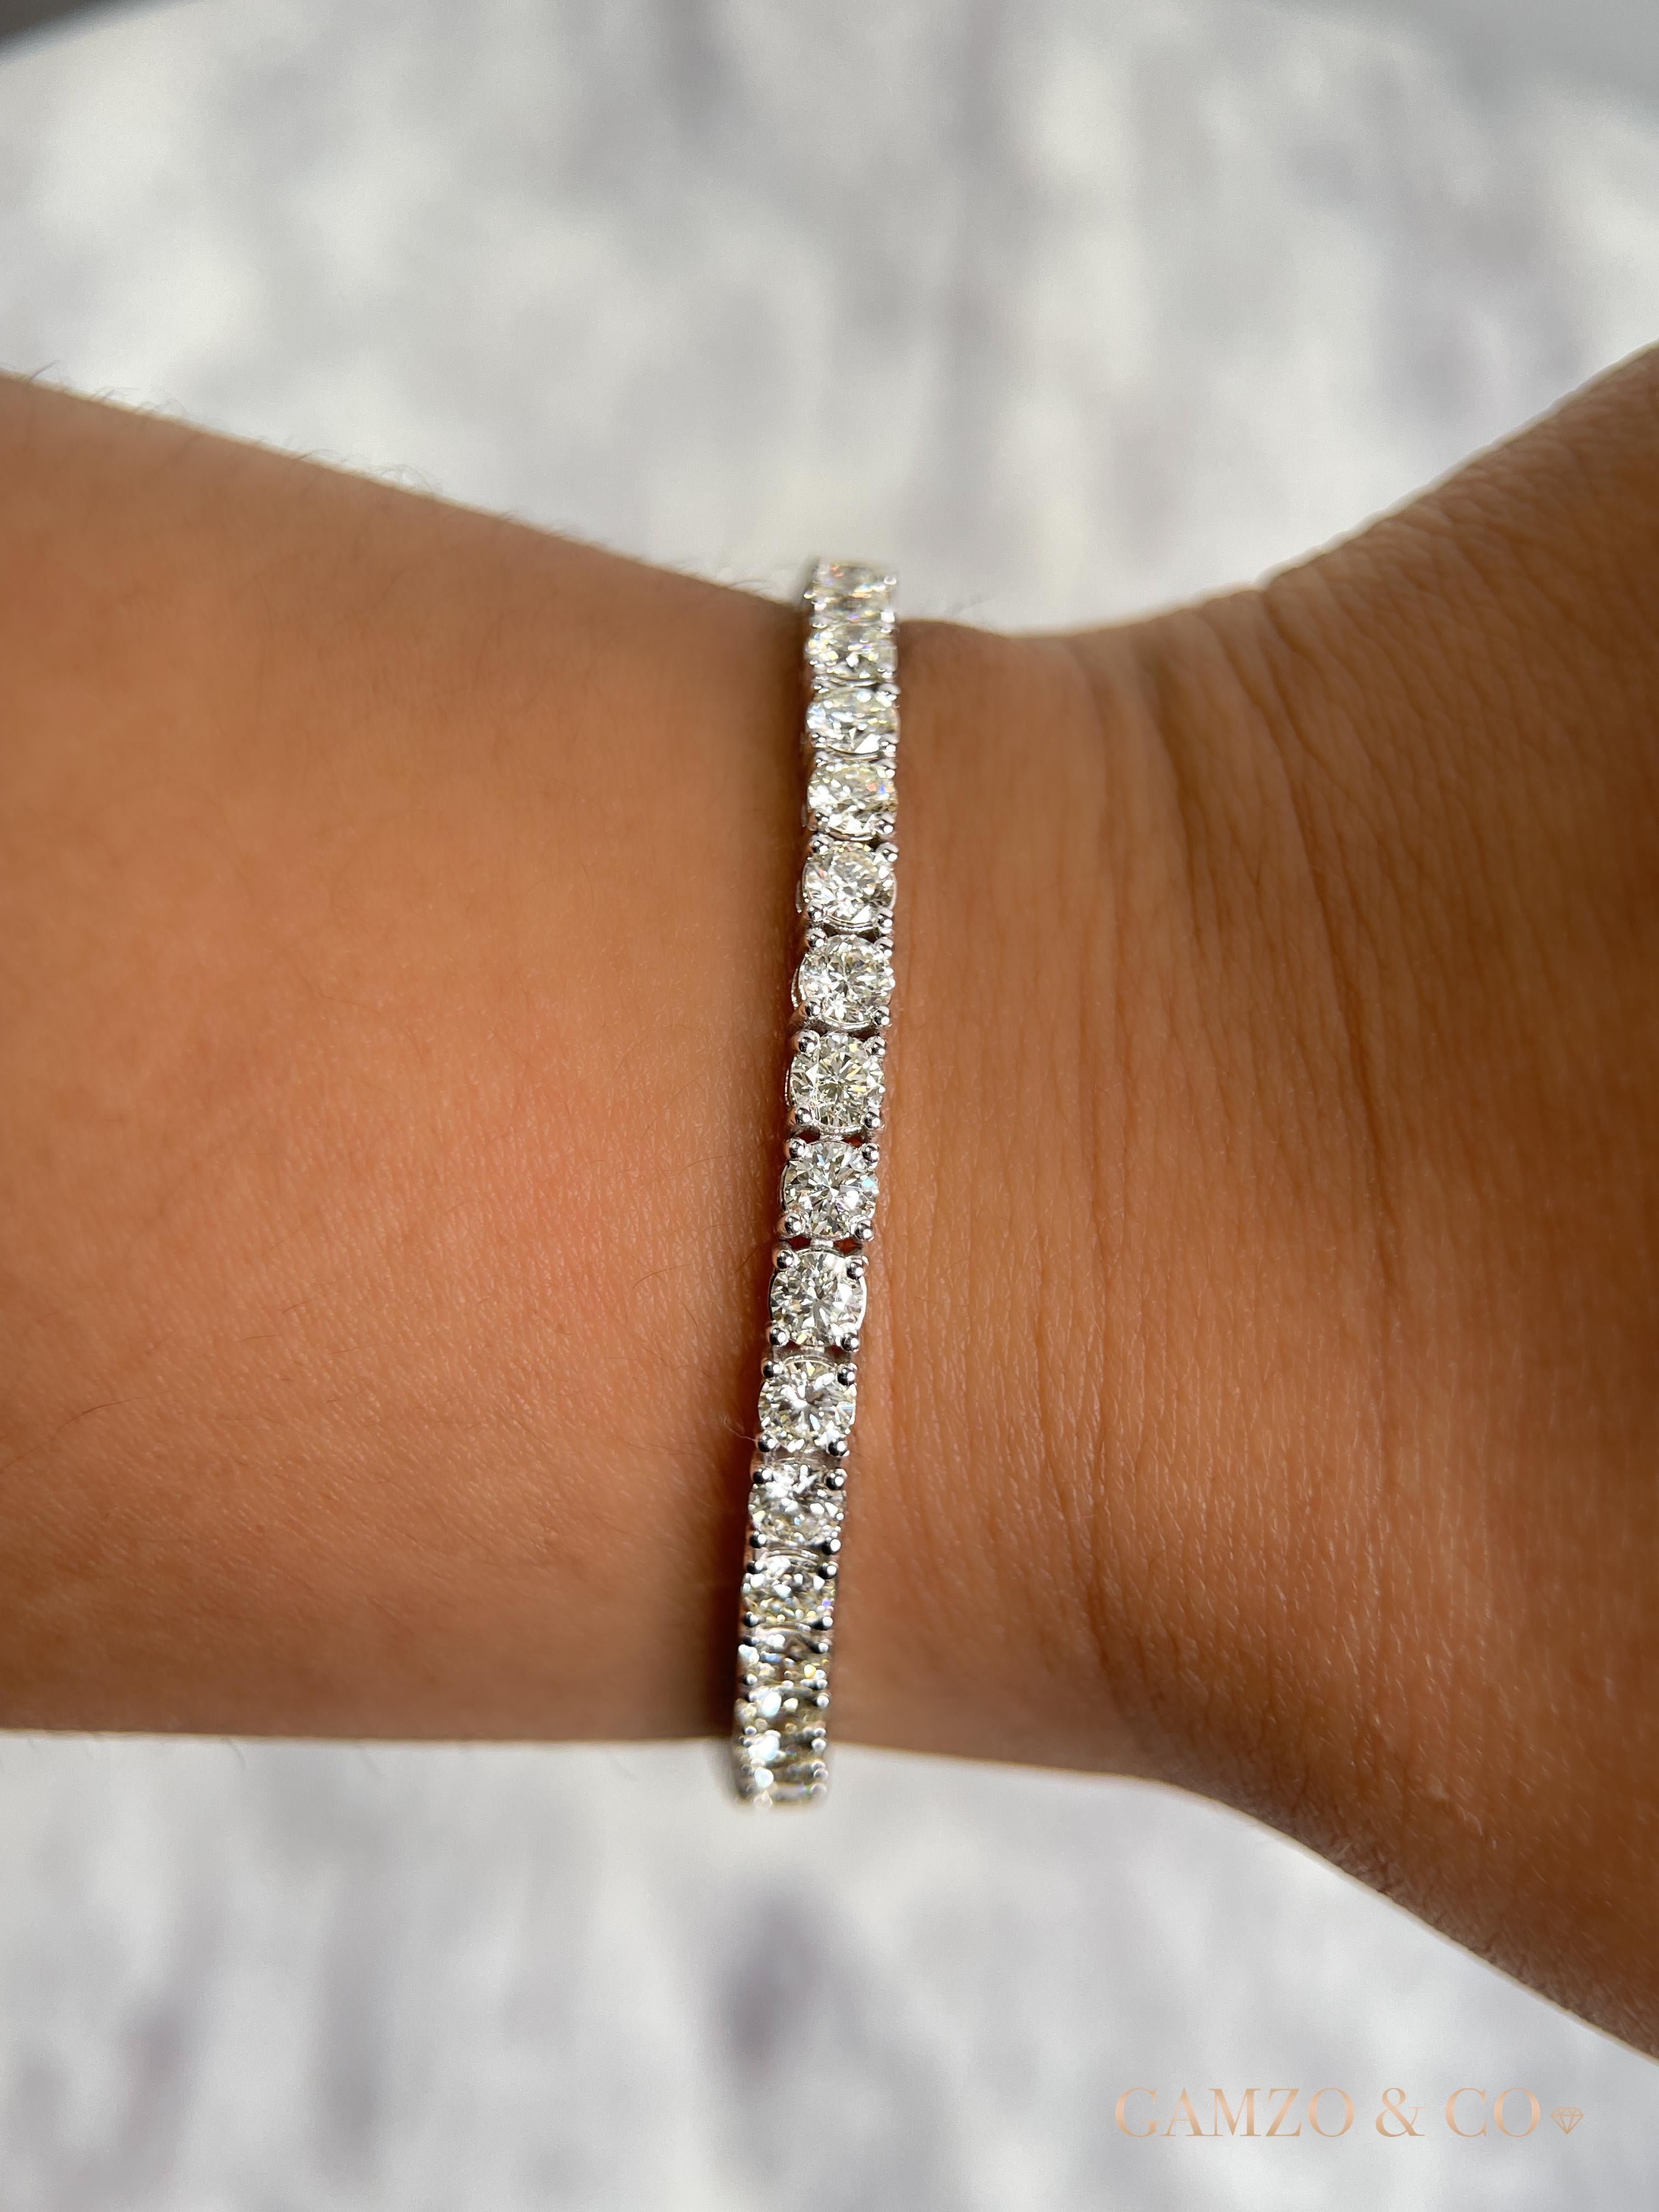 This diamond tennis bracelet features beautifully cut round diamonds set gorgeously in 14k gold.

Metal: 14k Gold
Diamond Cut: Round Natural Diamond 
Total Diamond Carats: 7ct
Diamond Clarity: VS
Diamond Color: F-G
Color: White Gold
Bracelet Length: